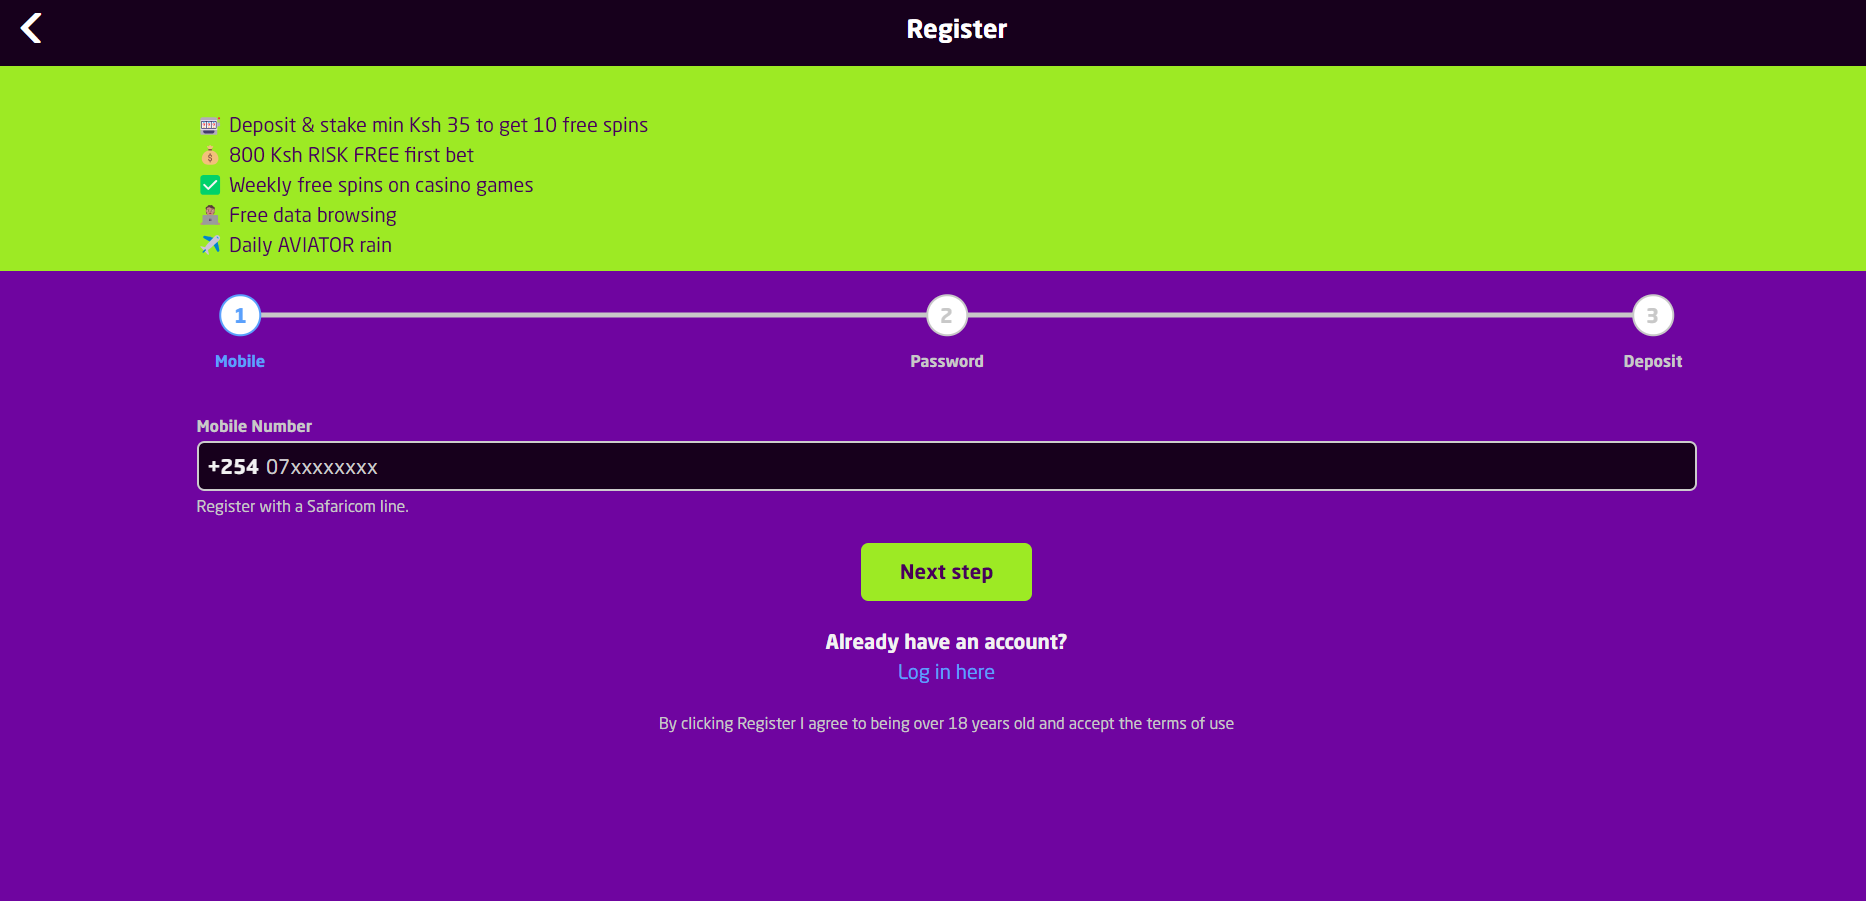 Images showing the registration in Bongobongo Aviator game